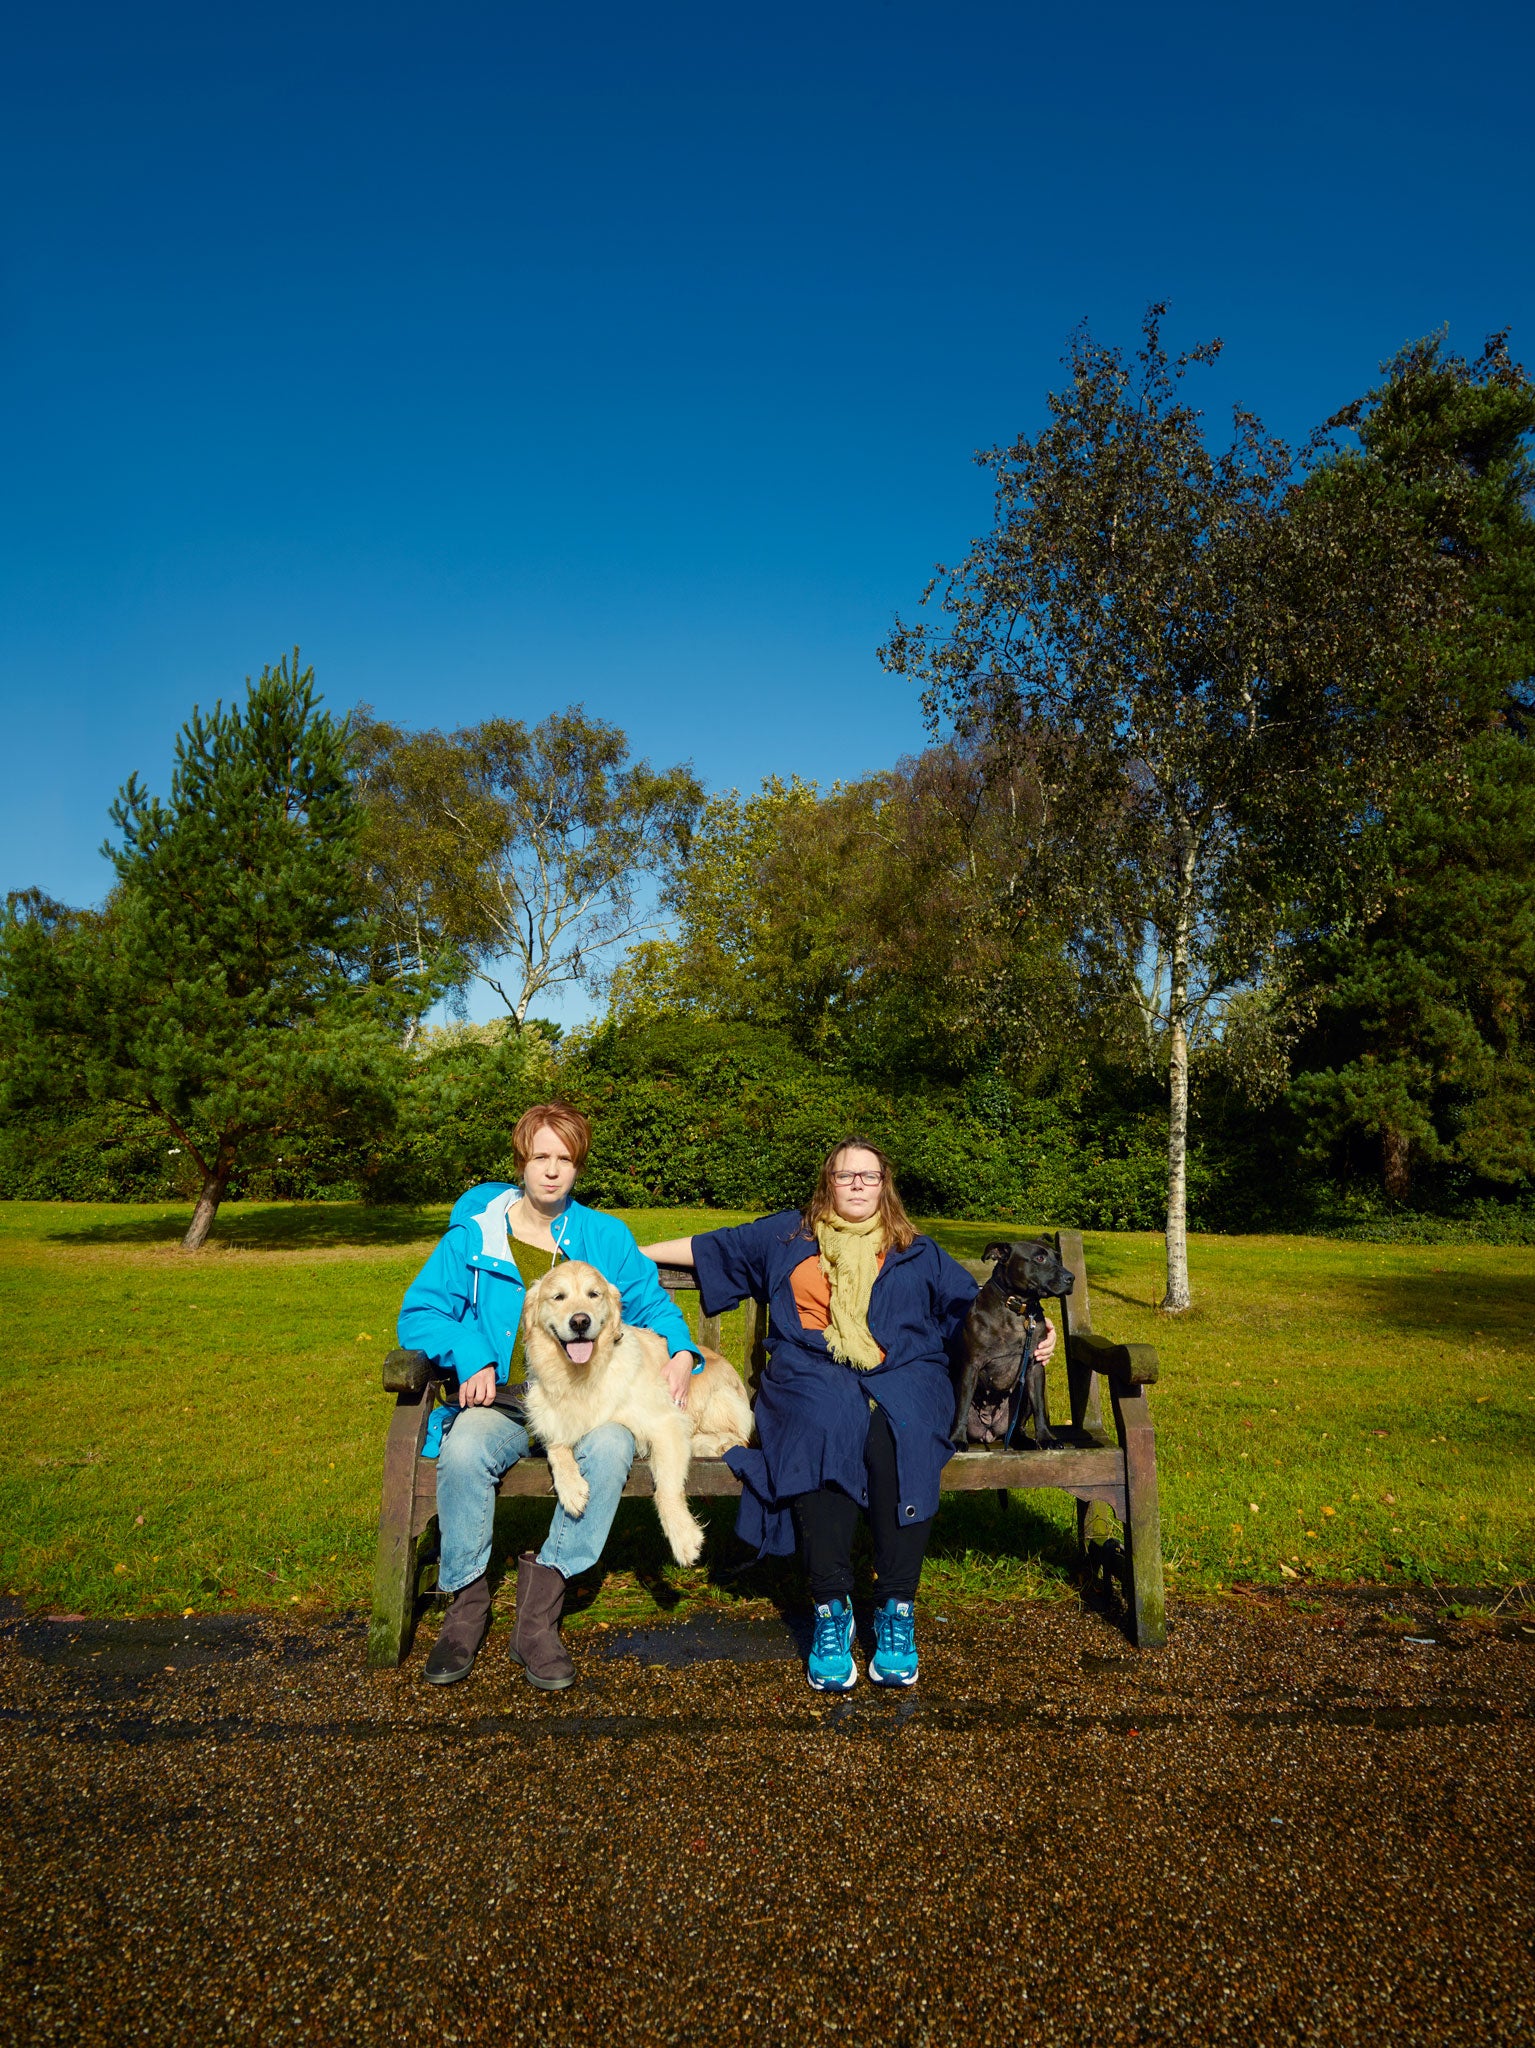 Vicki Pepperdine with her Golden Retriever Archie (left) and Joanna Scanlan with Staffordshire terrier Millie